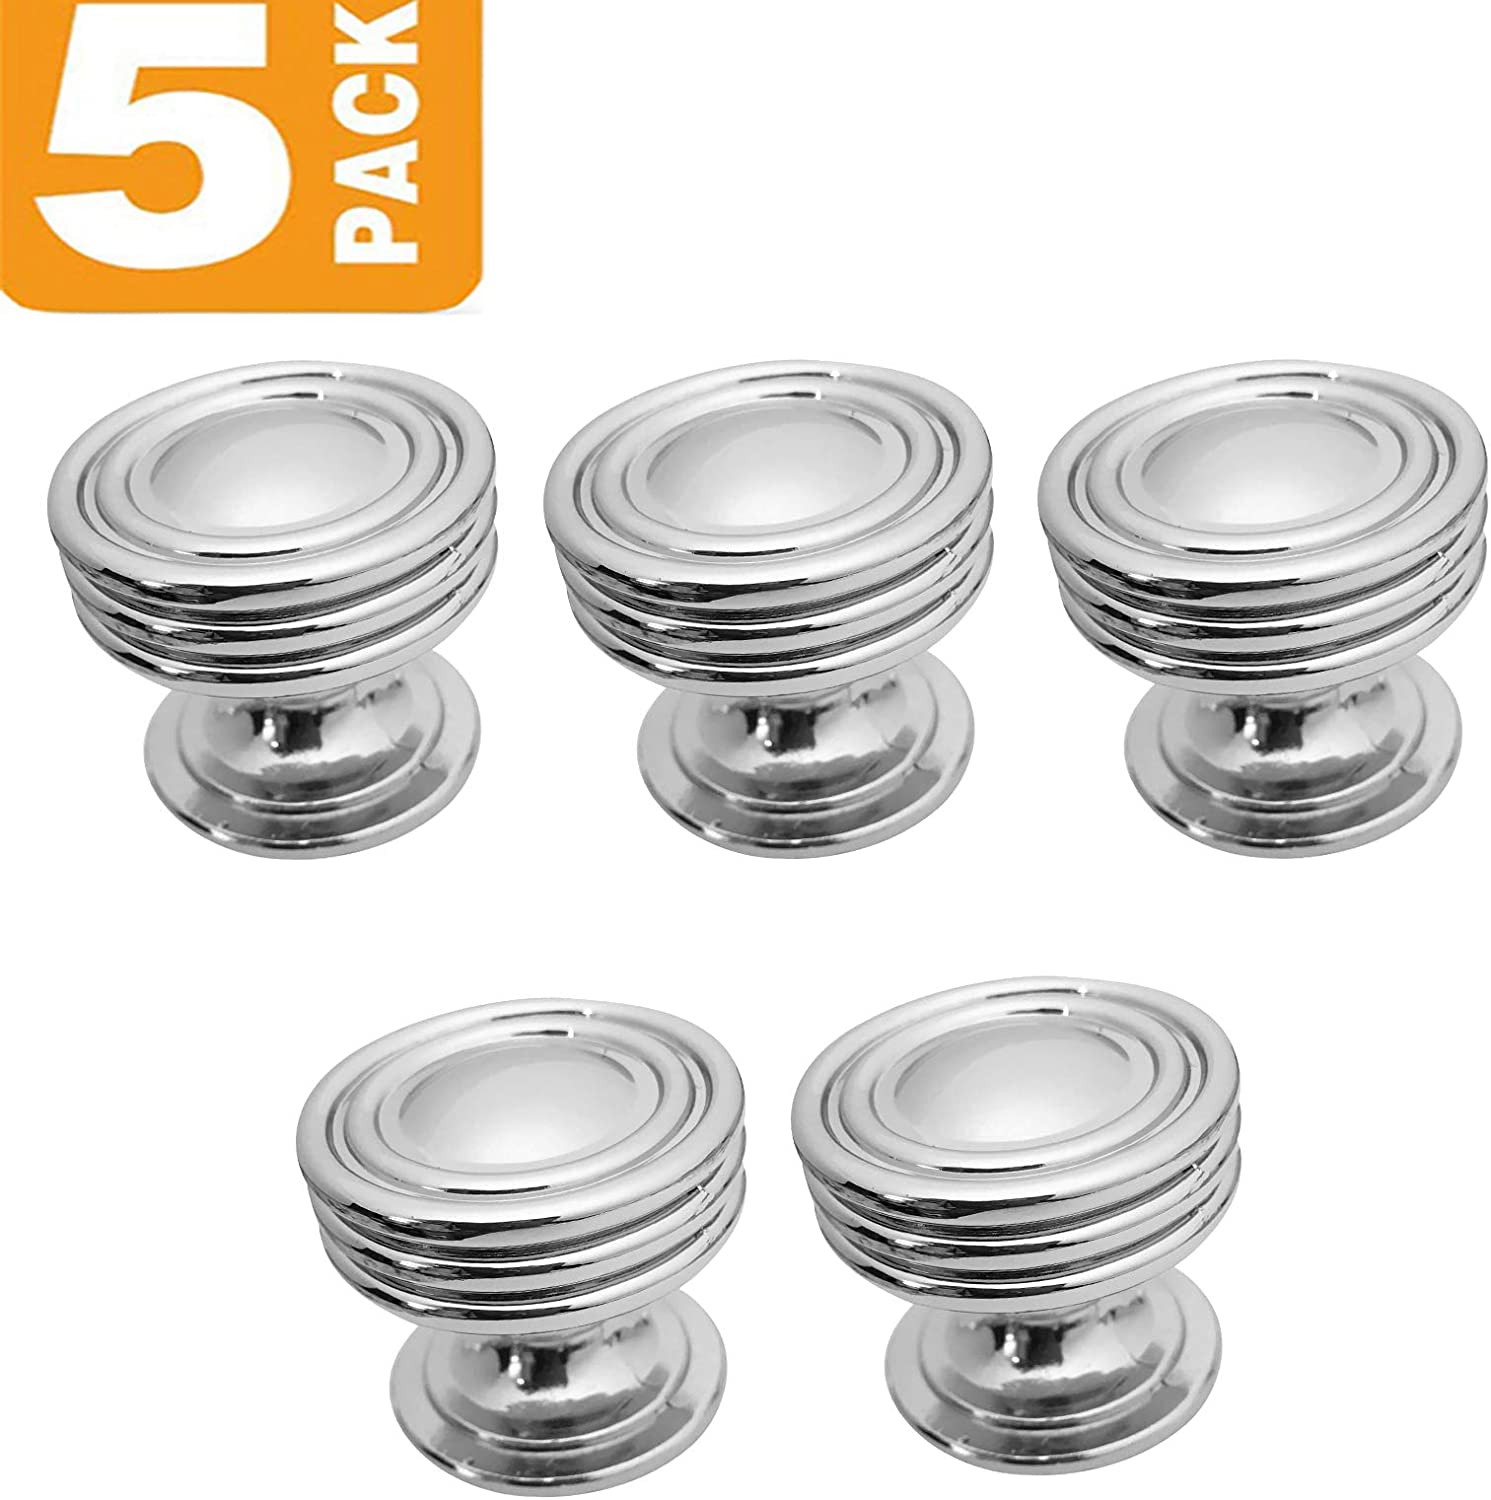 Polished Chrome Cabinet Knob by Southern Hills, Round Cabinet Knobs, 1 1/4 Inch Diameter, Pack of 5 Knobs, Chrome Cabinet Knobs, Cupboard Knobs, Kitchen Cabinet Knobs Chrome, SHKM008-CHR-5 - image 2 of 3